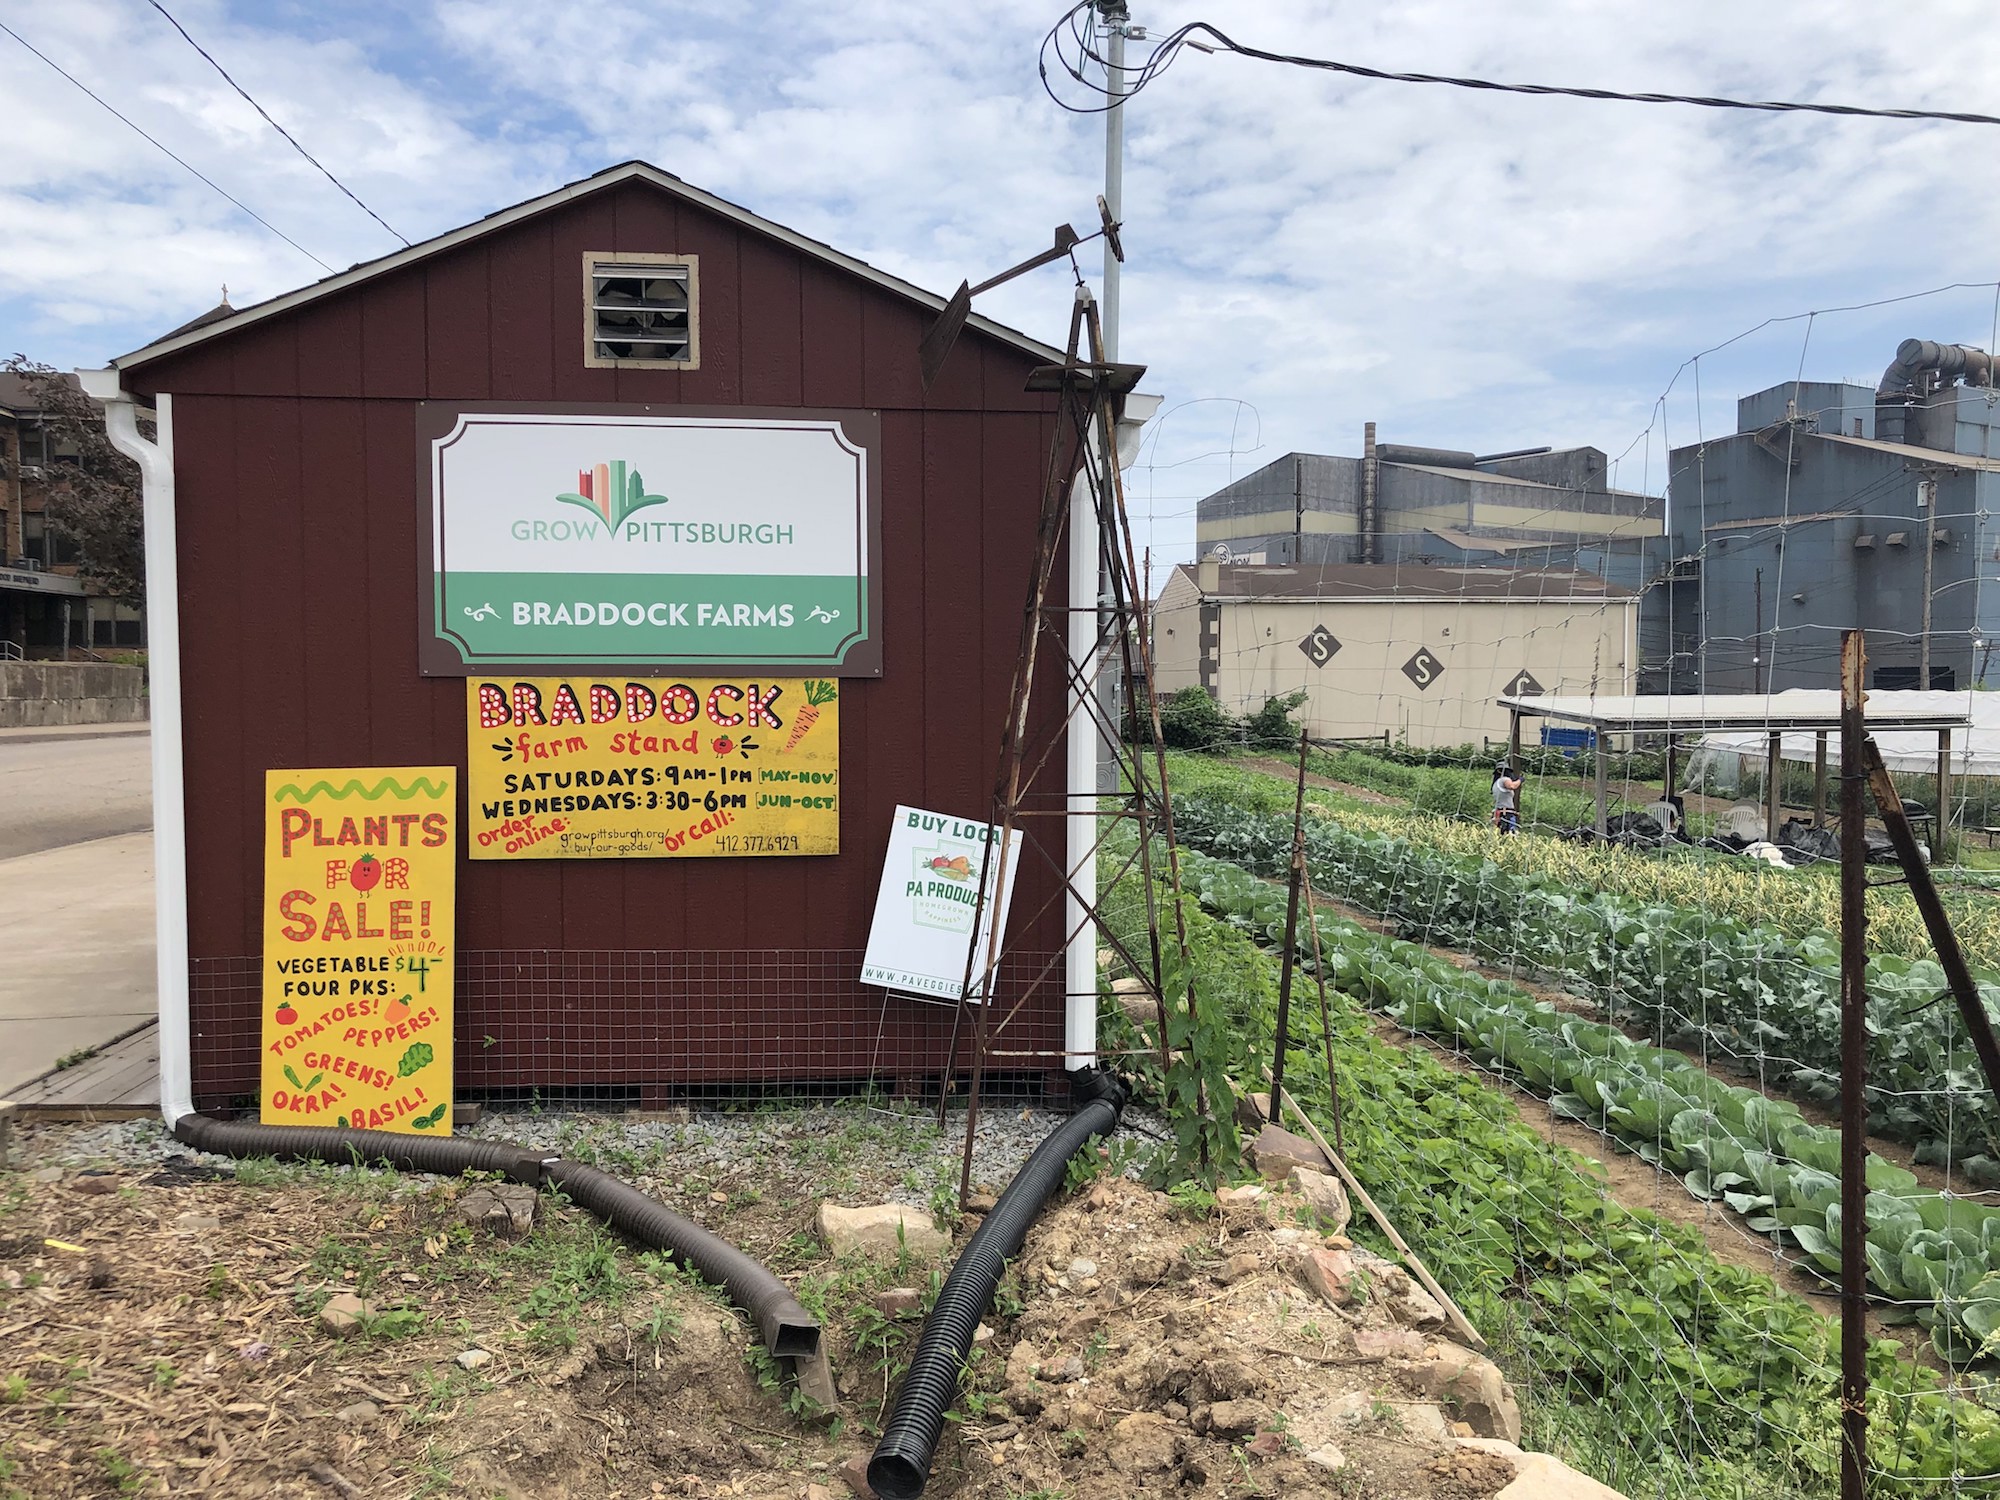 a red shed is marked with several signs including a Braddock Farms marker. To the right, there are rows of green crops growing under blue cloudy skies